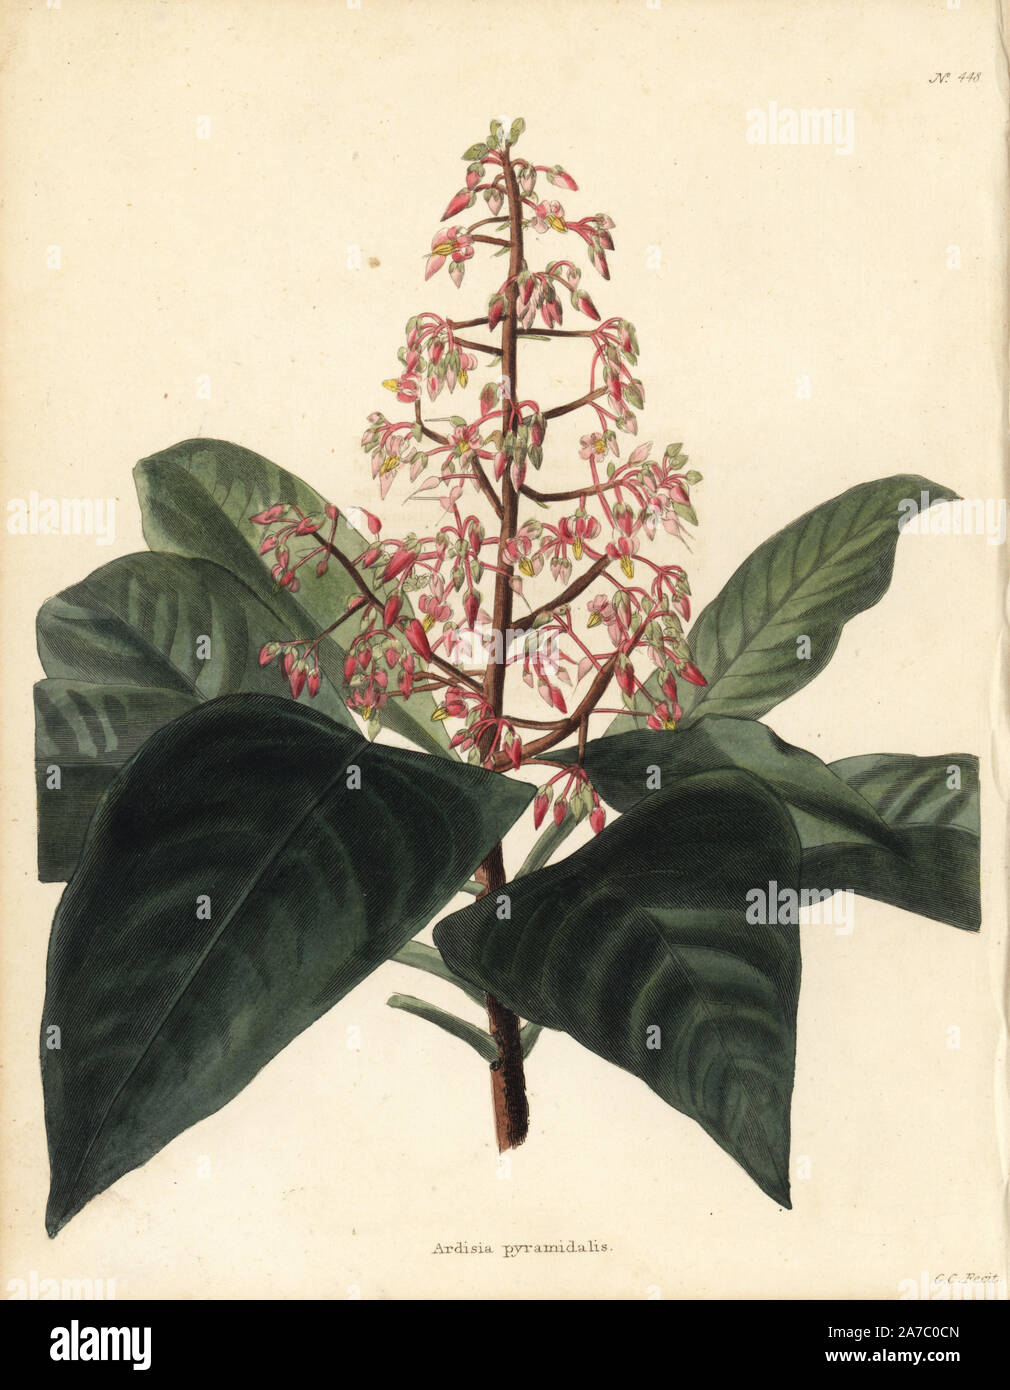 Aunasin, Ardisia pyramidalis. Handcoloured copperplate engraving by George Cooke from Conrad Loddiges' Botanical Cabinet, London, 1810. Stock Photo